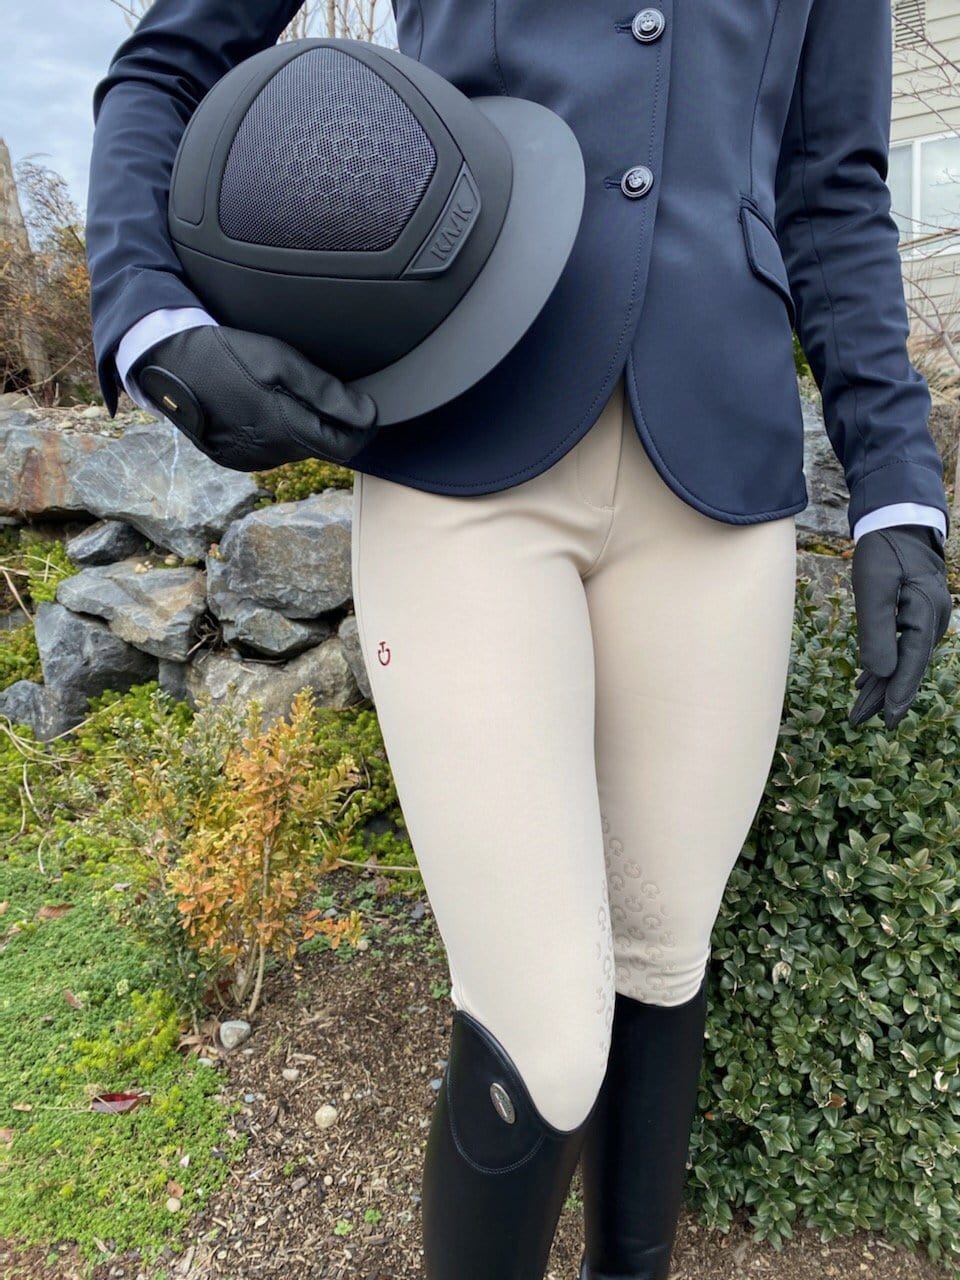 Cavalleria Toscana New Grip System Breeches – Completely Equine